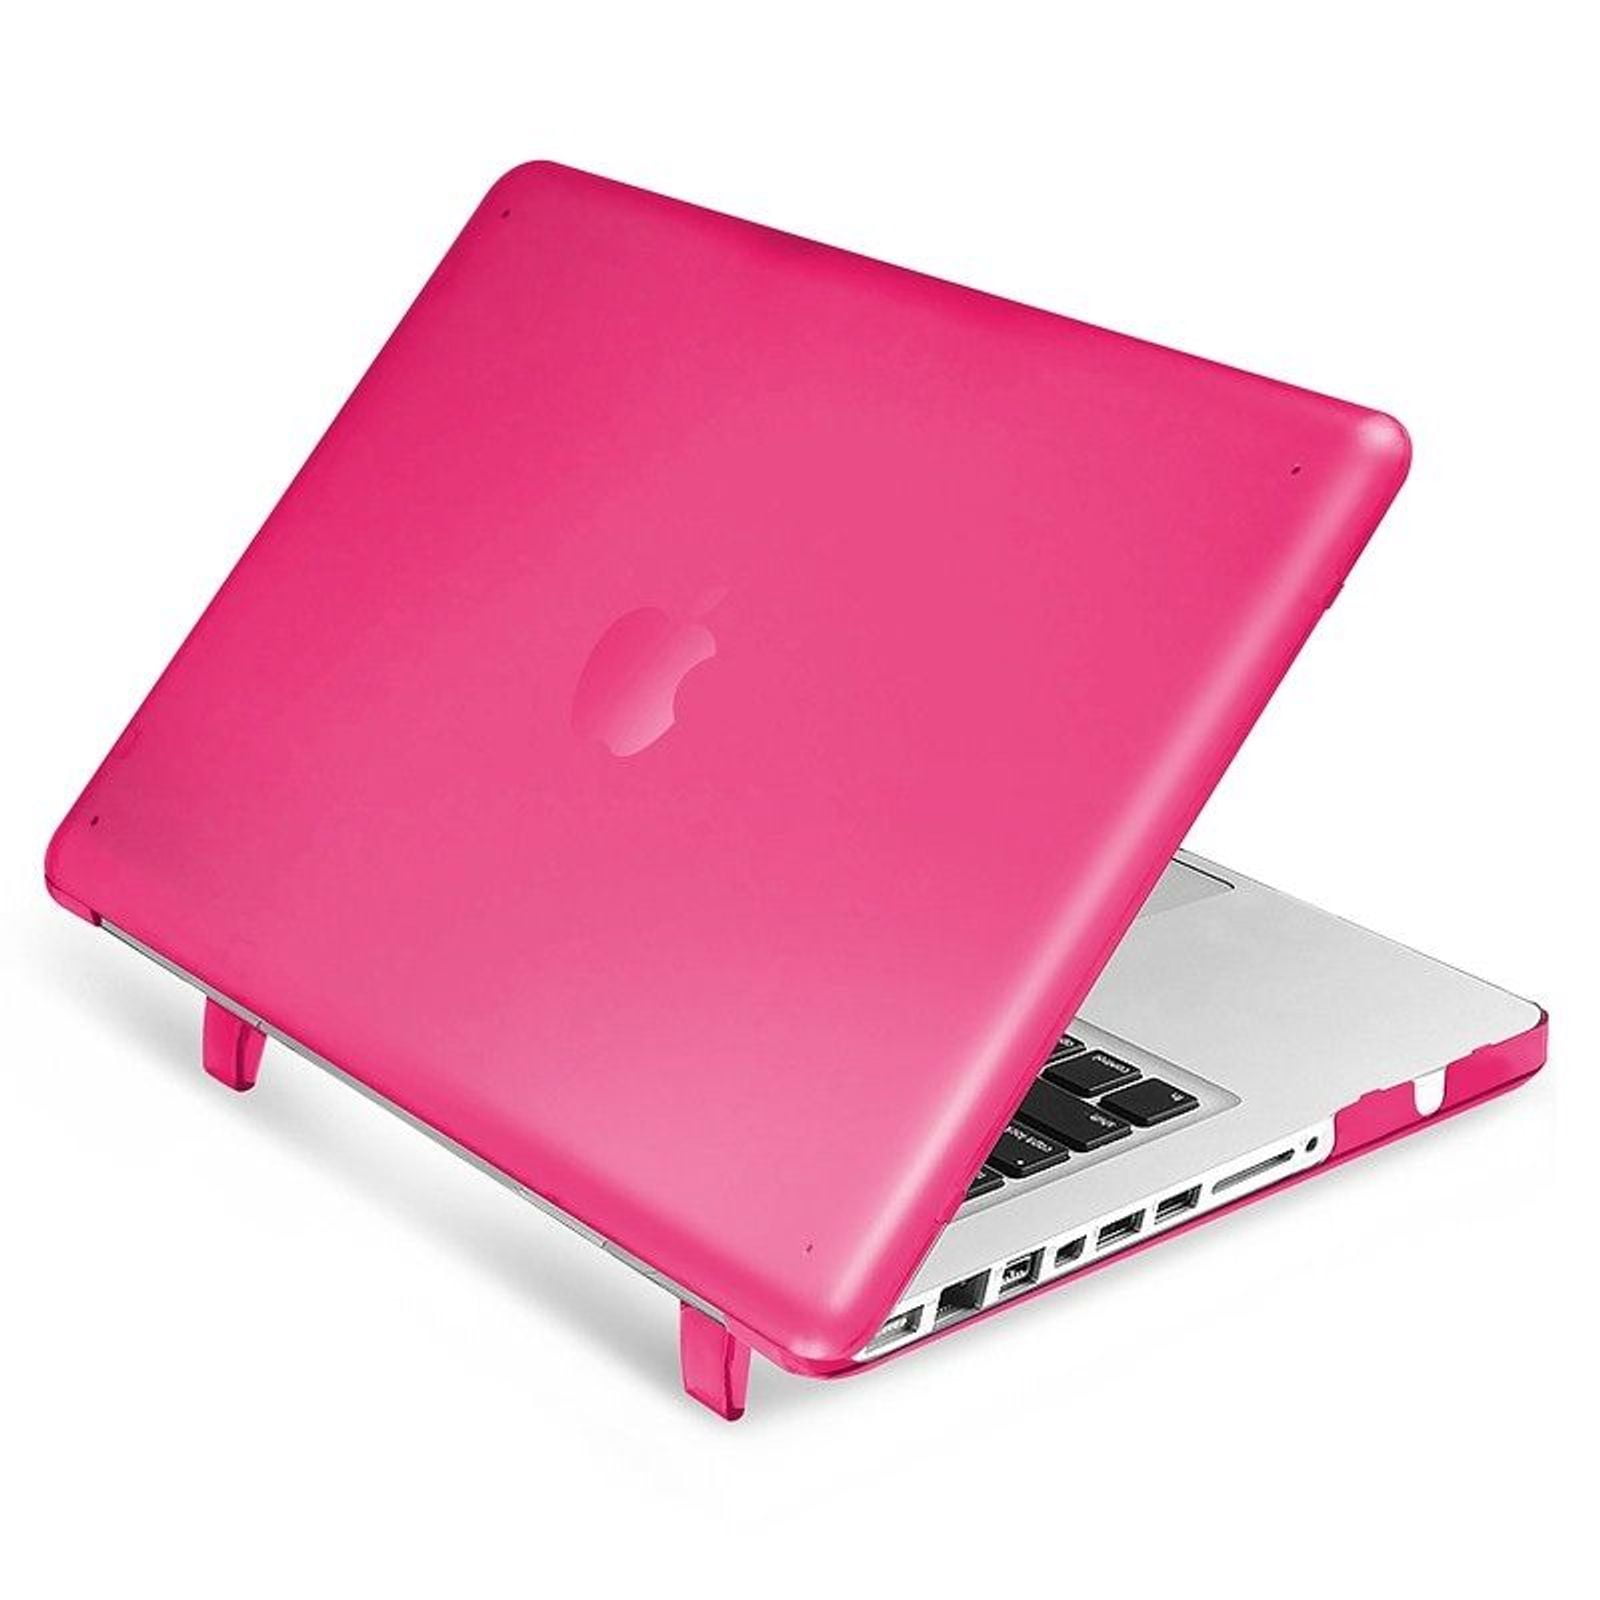 Rubberized DEEP PINK Hard Case Cover for Macbook PRO 13 